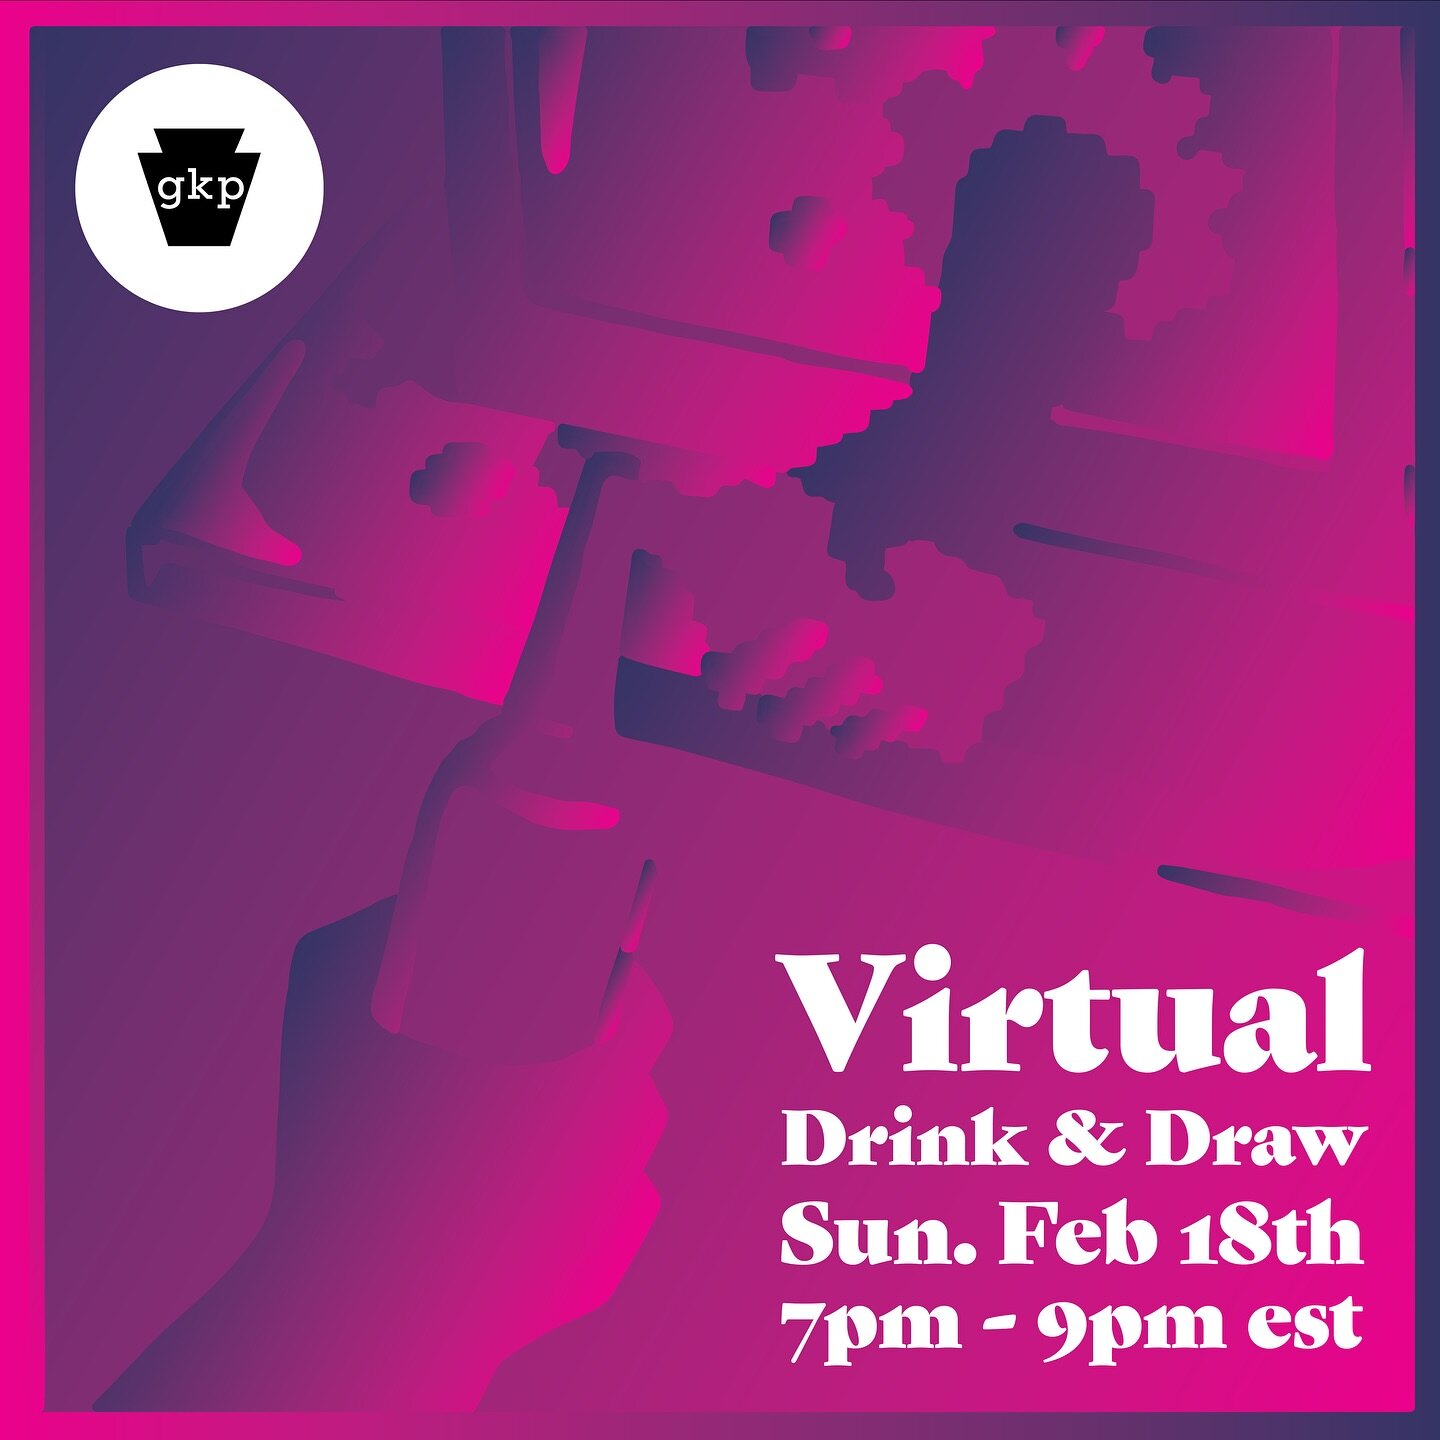 *IN TWO SHORT WEEKS*

Join me and other creatives on Sunday, February 18th from 7-9PM EST for a night of drawing, drinking (or not), socializing and networking on @zoom ! 🤝

Bring a sketchbook, tablet, or whatever your favorite medium is, and come m